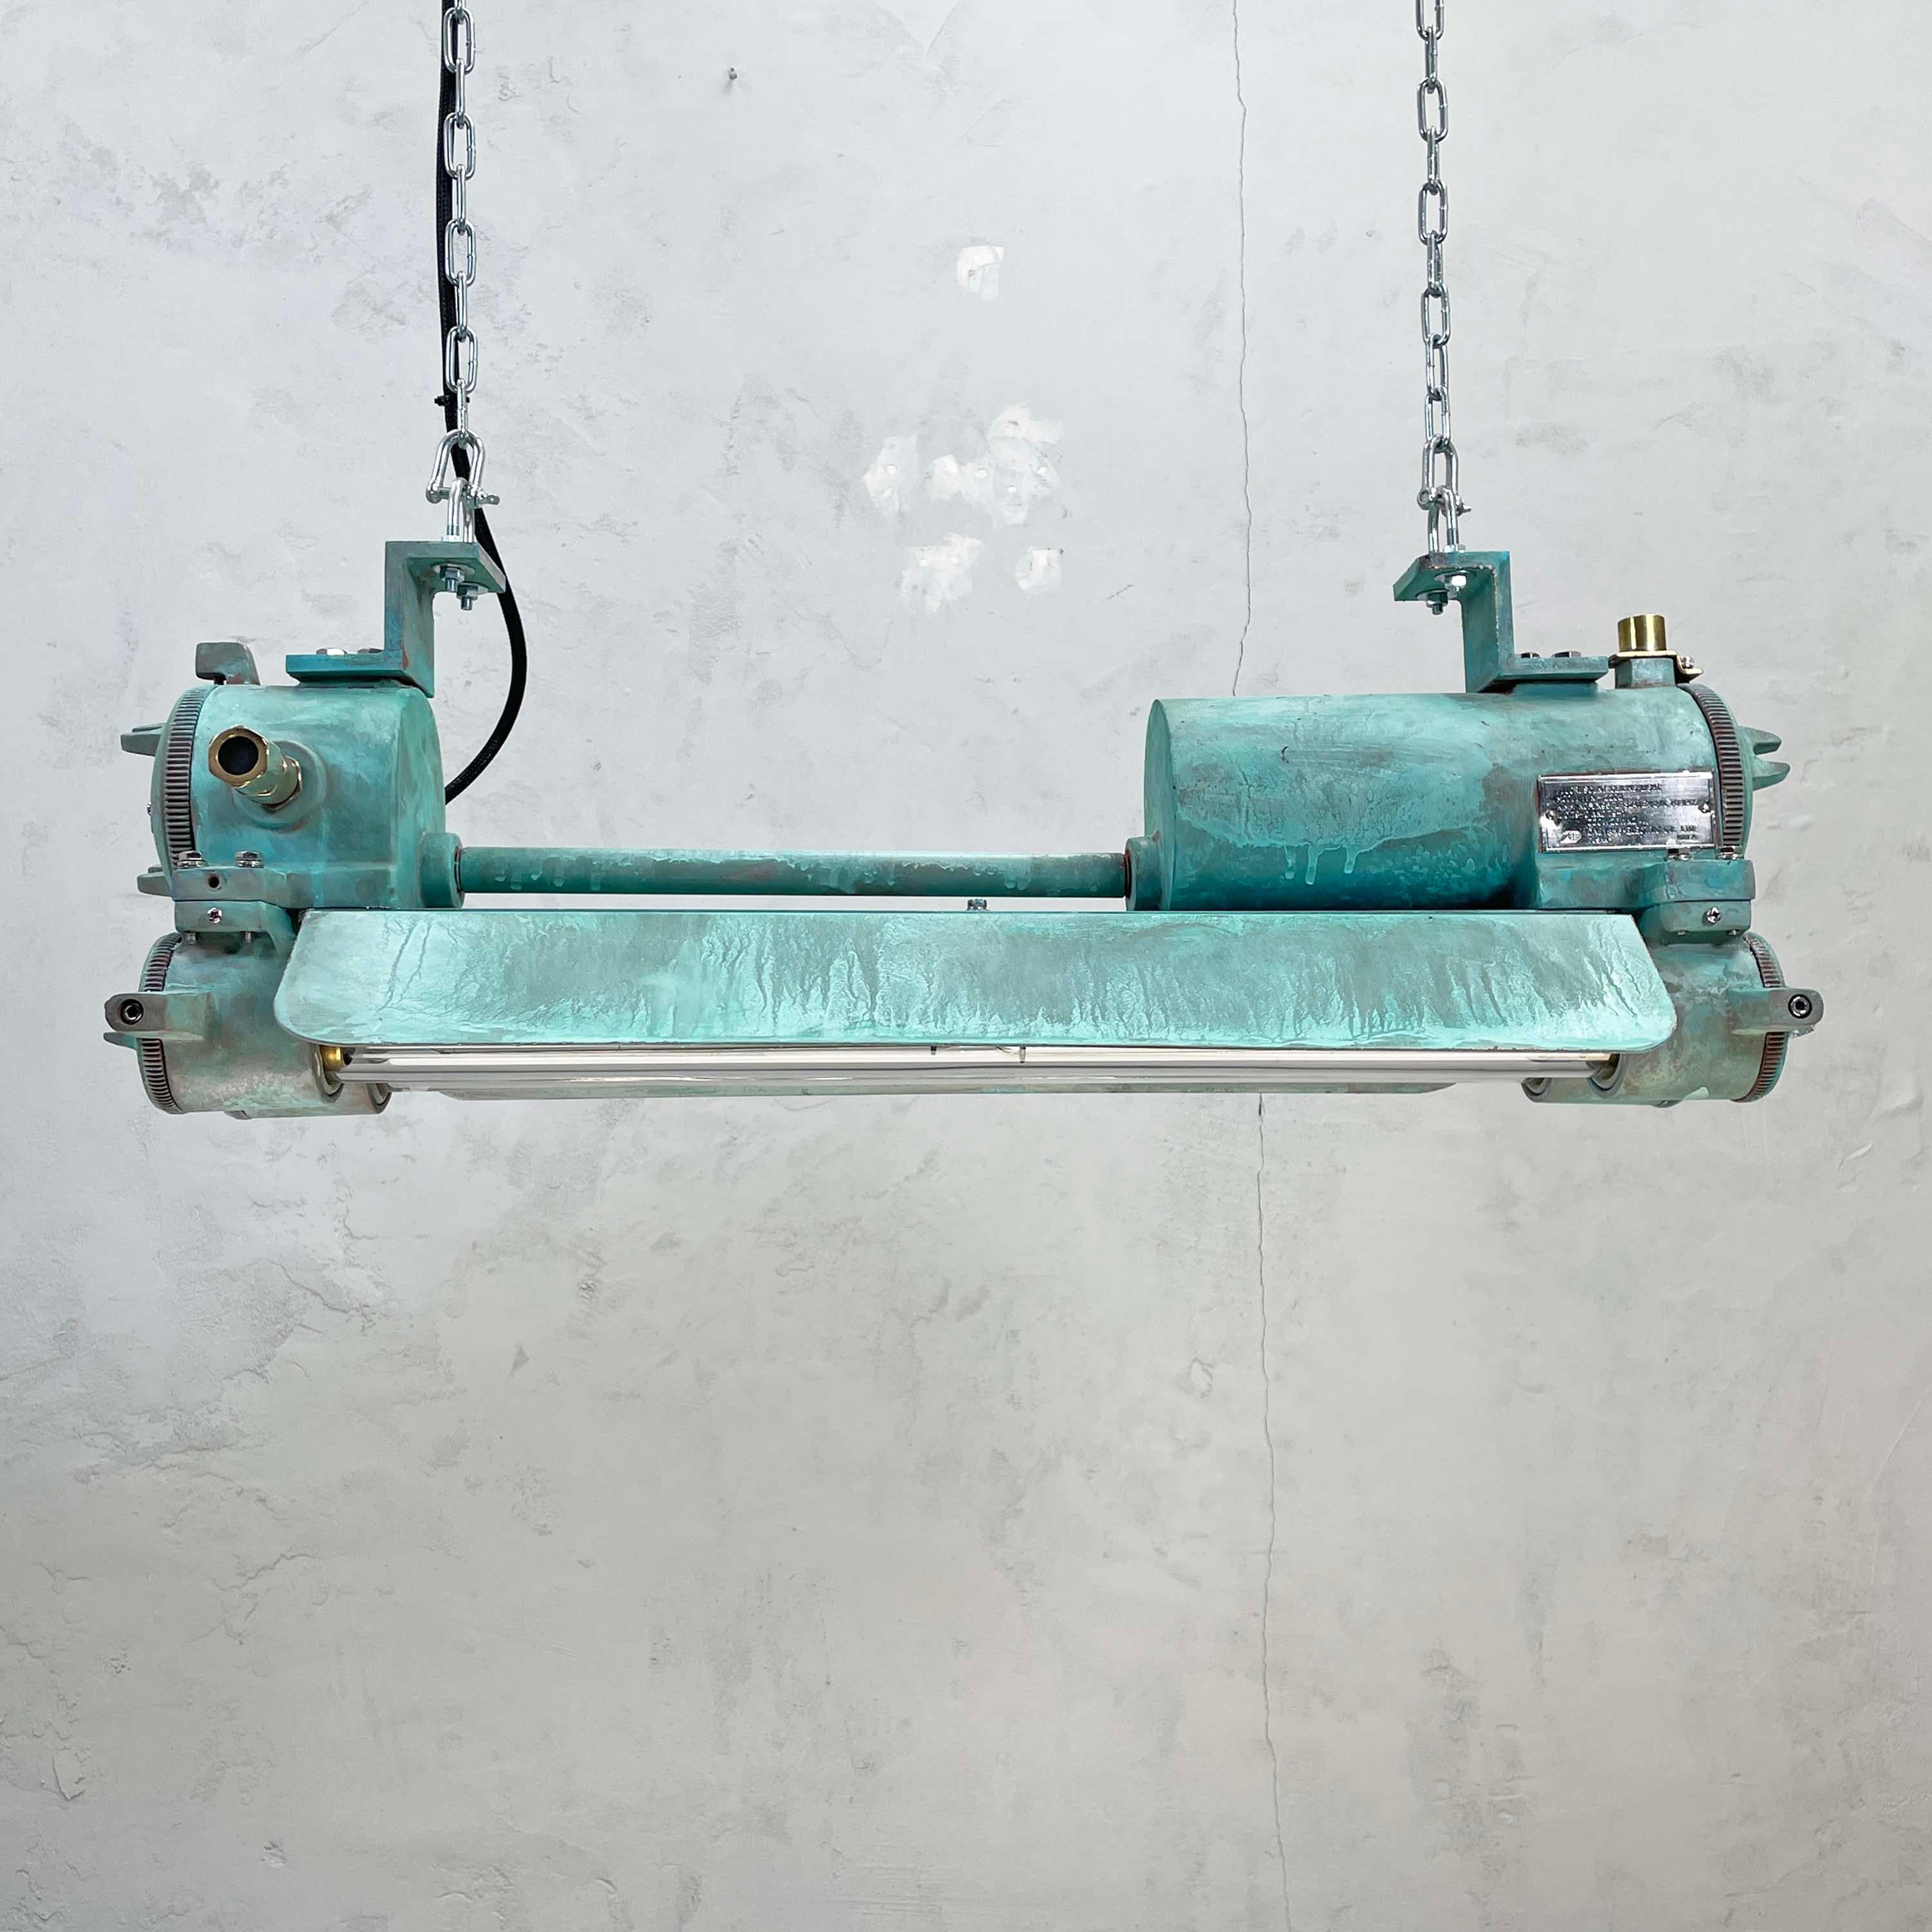 Vintage industrial Edison flameproof striplight with verdigris finish manufactured by Daeyang c1970. Reclaimed and professionally restored by hand in UK by Loomlight to modern lighting standards ready for everyday use.

The main body is cast